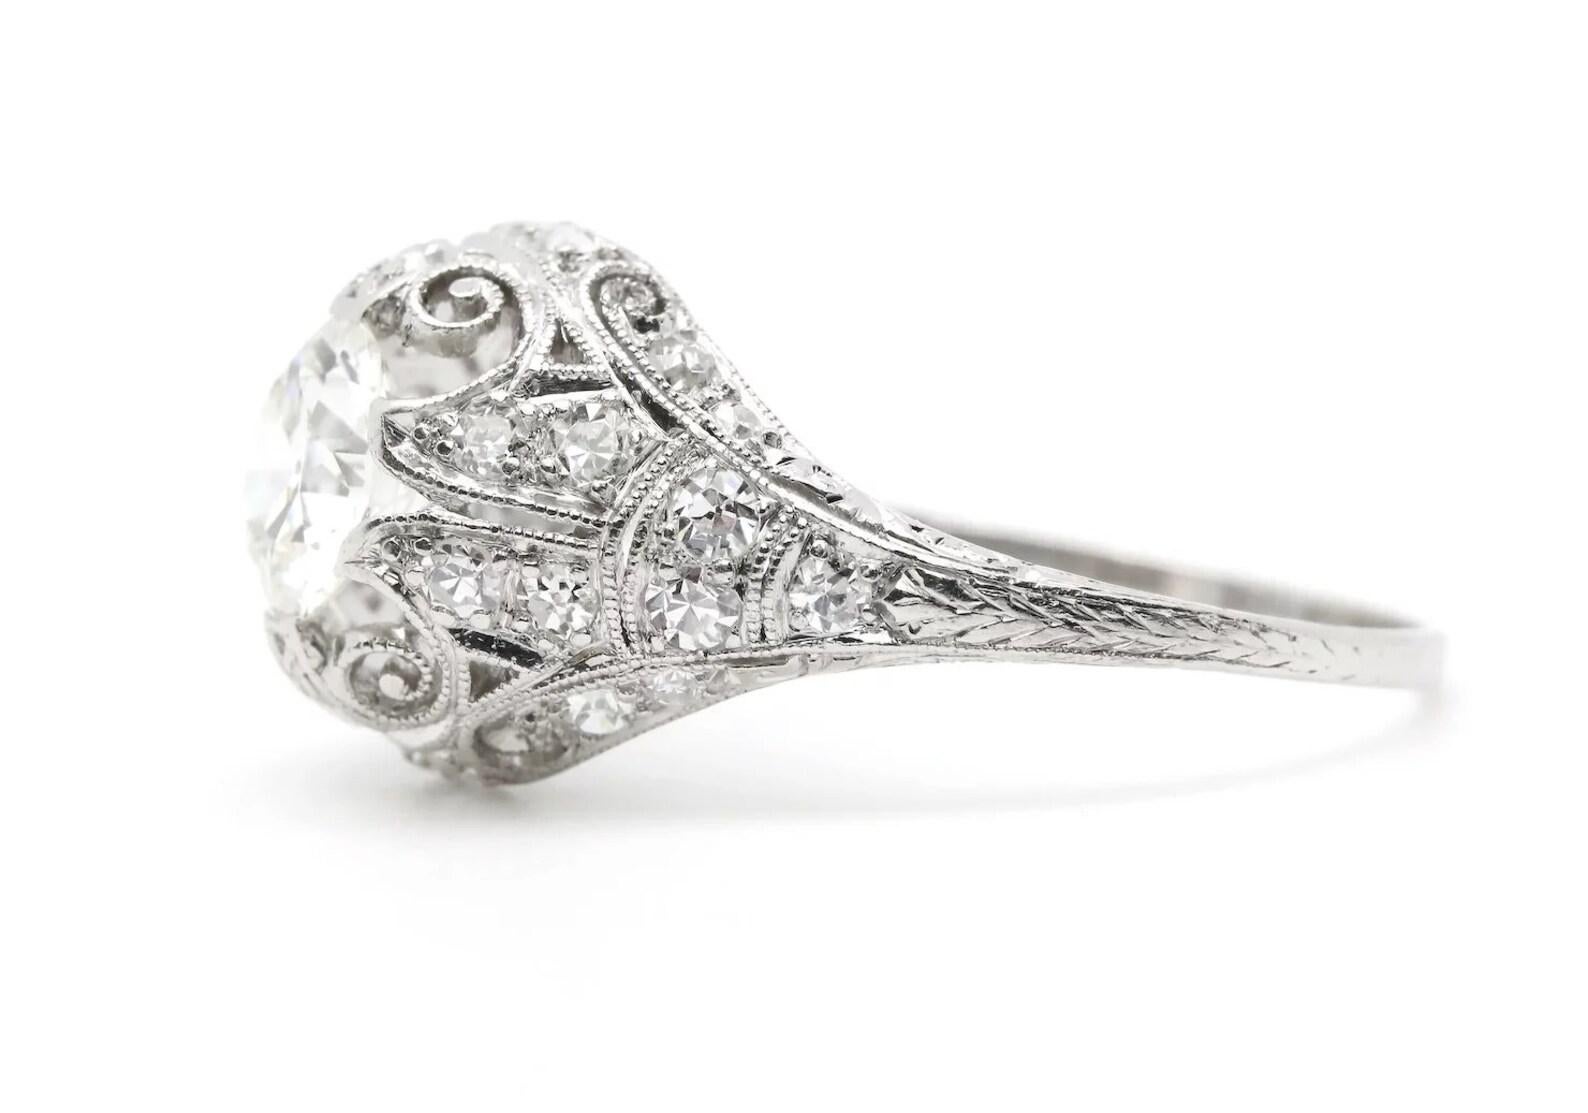 A beautiful handmade Edwardian period diamond engagement ring in platinum. Centered by a 0.85 carat H color VS1 clarity antique European cut diamond secured by six unique claw form prongs. Accenting the handmade mounting are 28 pave set European cut